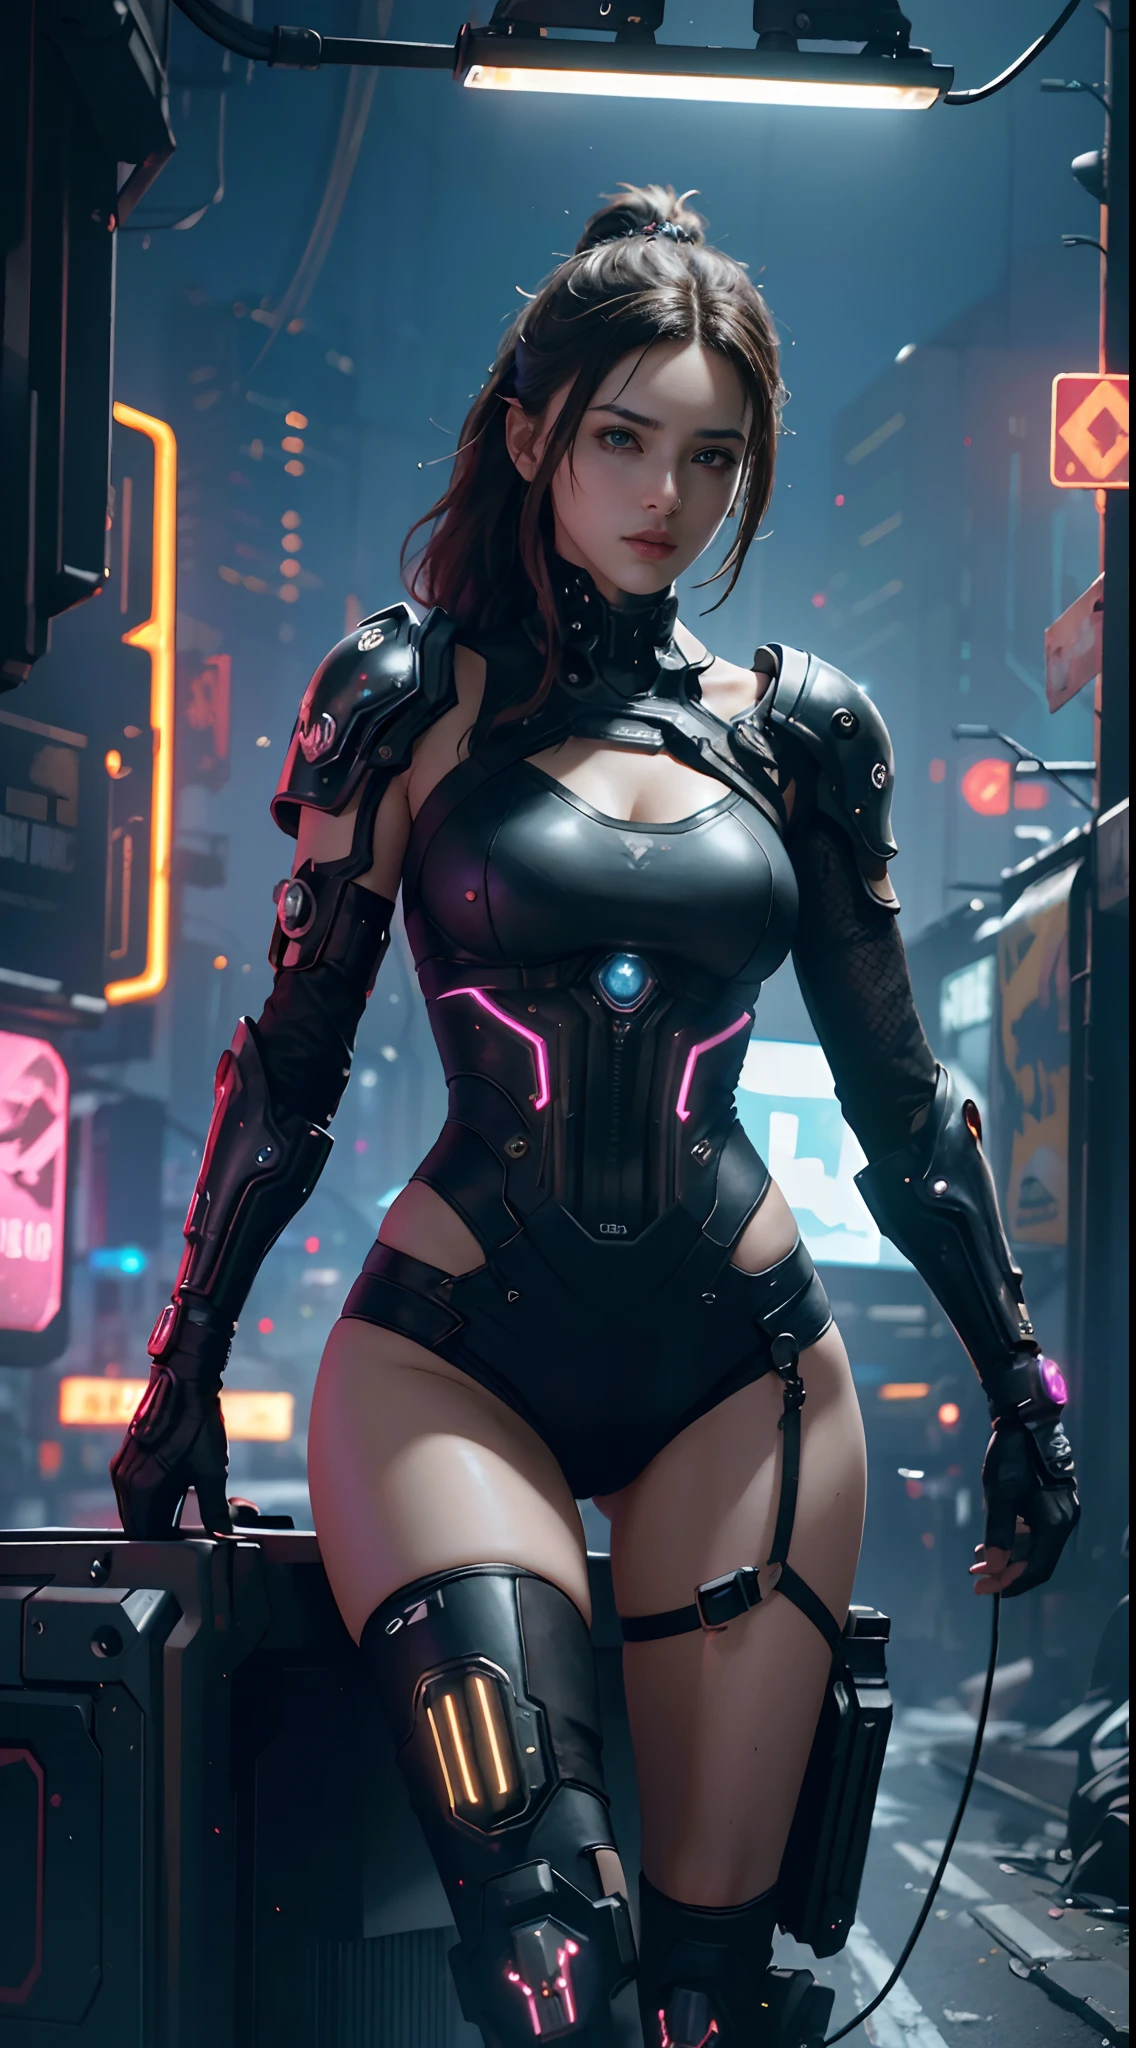 Best Quality)), ((Masterpiece)), (Very Detailed:1.3), 3D, Beautiful (Cyberpunk:1.3)), 1 girl, full body, mohicans hairstyle, big breast, slender body, slender hips, big breasts, dynamic pose, wearing full ((heavy cyberpunk armor)) with neon trim, (head-mounted displays), fiber optic cables, company logos, science fiction, Night Cyberpunk city background, Gantz, In the Style of Cyberpunk 2077, Ultra realistic photo, masterpiece, best quality, CG, wallpaper, HDR, high quality, high-definition, extremely detailed, {beautiful detailed face}, {beautiful detailed eyes}, (detailed light){{intricate detail}}, {highres}, ((detailed face)), neon light, chiaroscuro, key visual, intricate detail, highly detailed, breathtaking, vibrant, cinematic, low ISO, white balance, rule of thirds, wide aperture, 8K RAW, efficient sub-pixels, subpixel convolution, luminous particles,